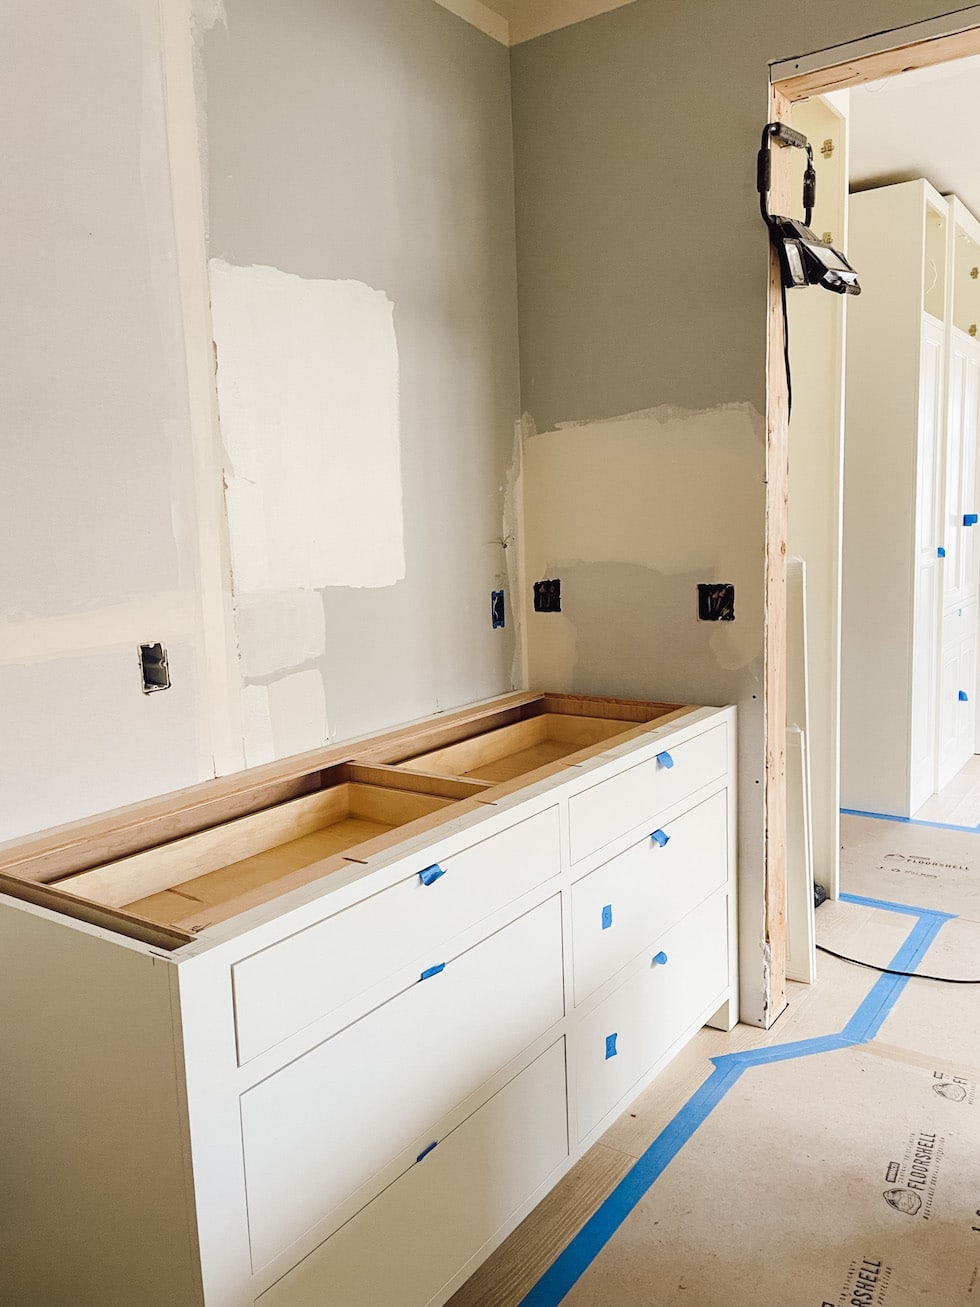 Kitchen Renovation Update: Floors, Cabinets, Sink, Hardware and More!